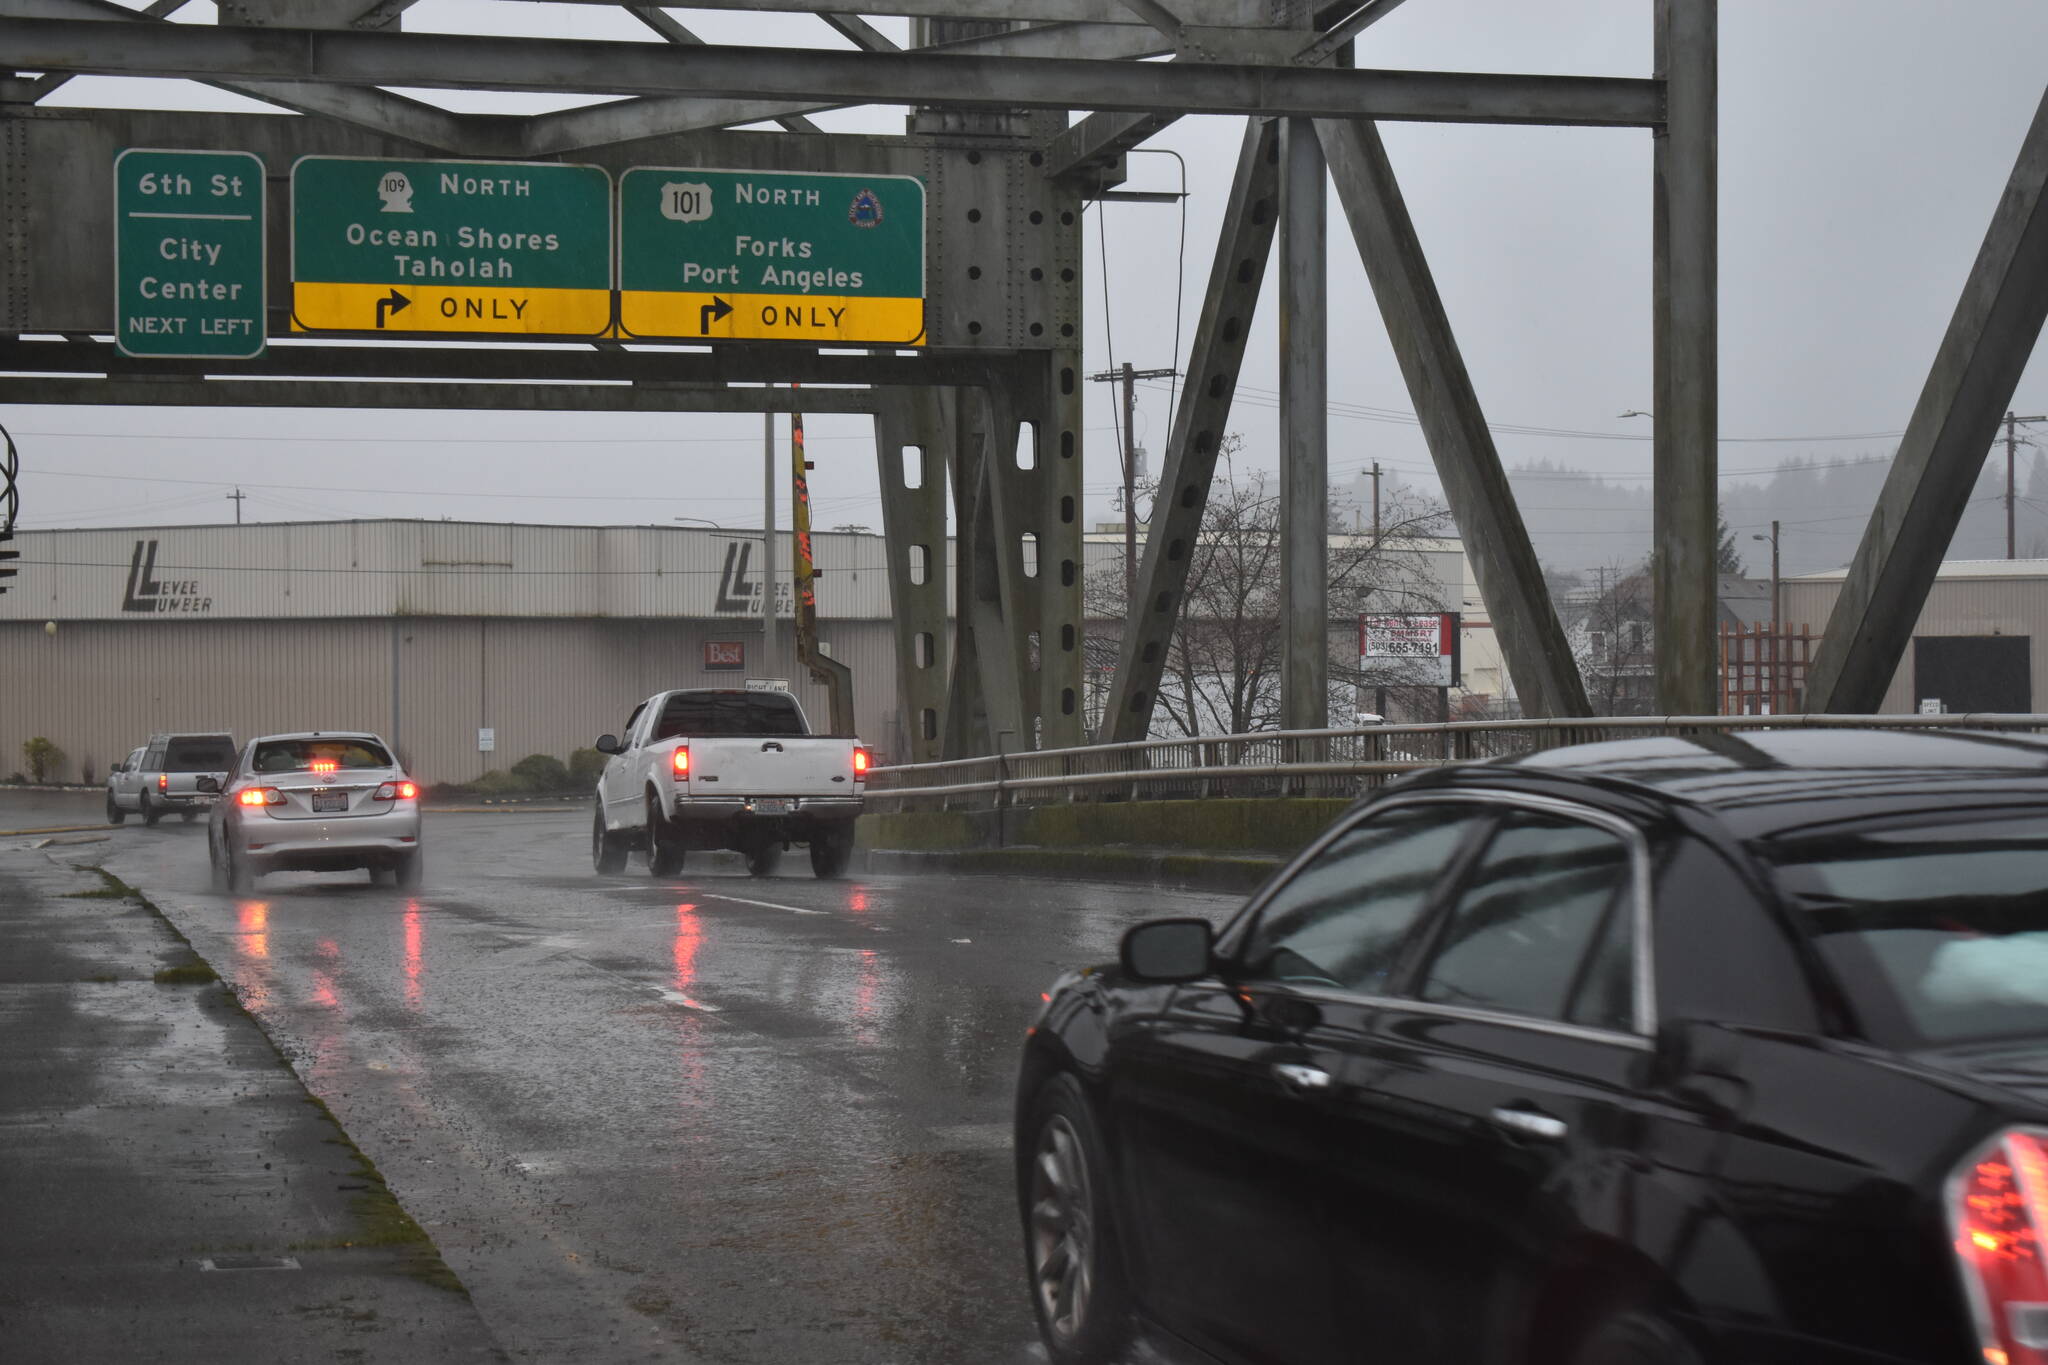 Matthew N. Wells | The Daily World 
Cars and trucks head west over Riverside Bridge in Hoquiam during rainfall Tuesday, Jan. 11, 2022, which was expected to continue until Thursday morning, according to the National Weather Service in Seattle.